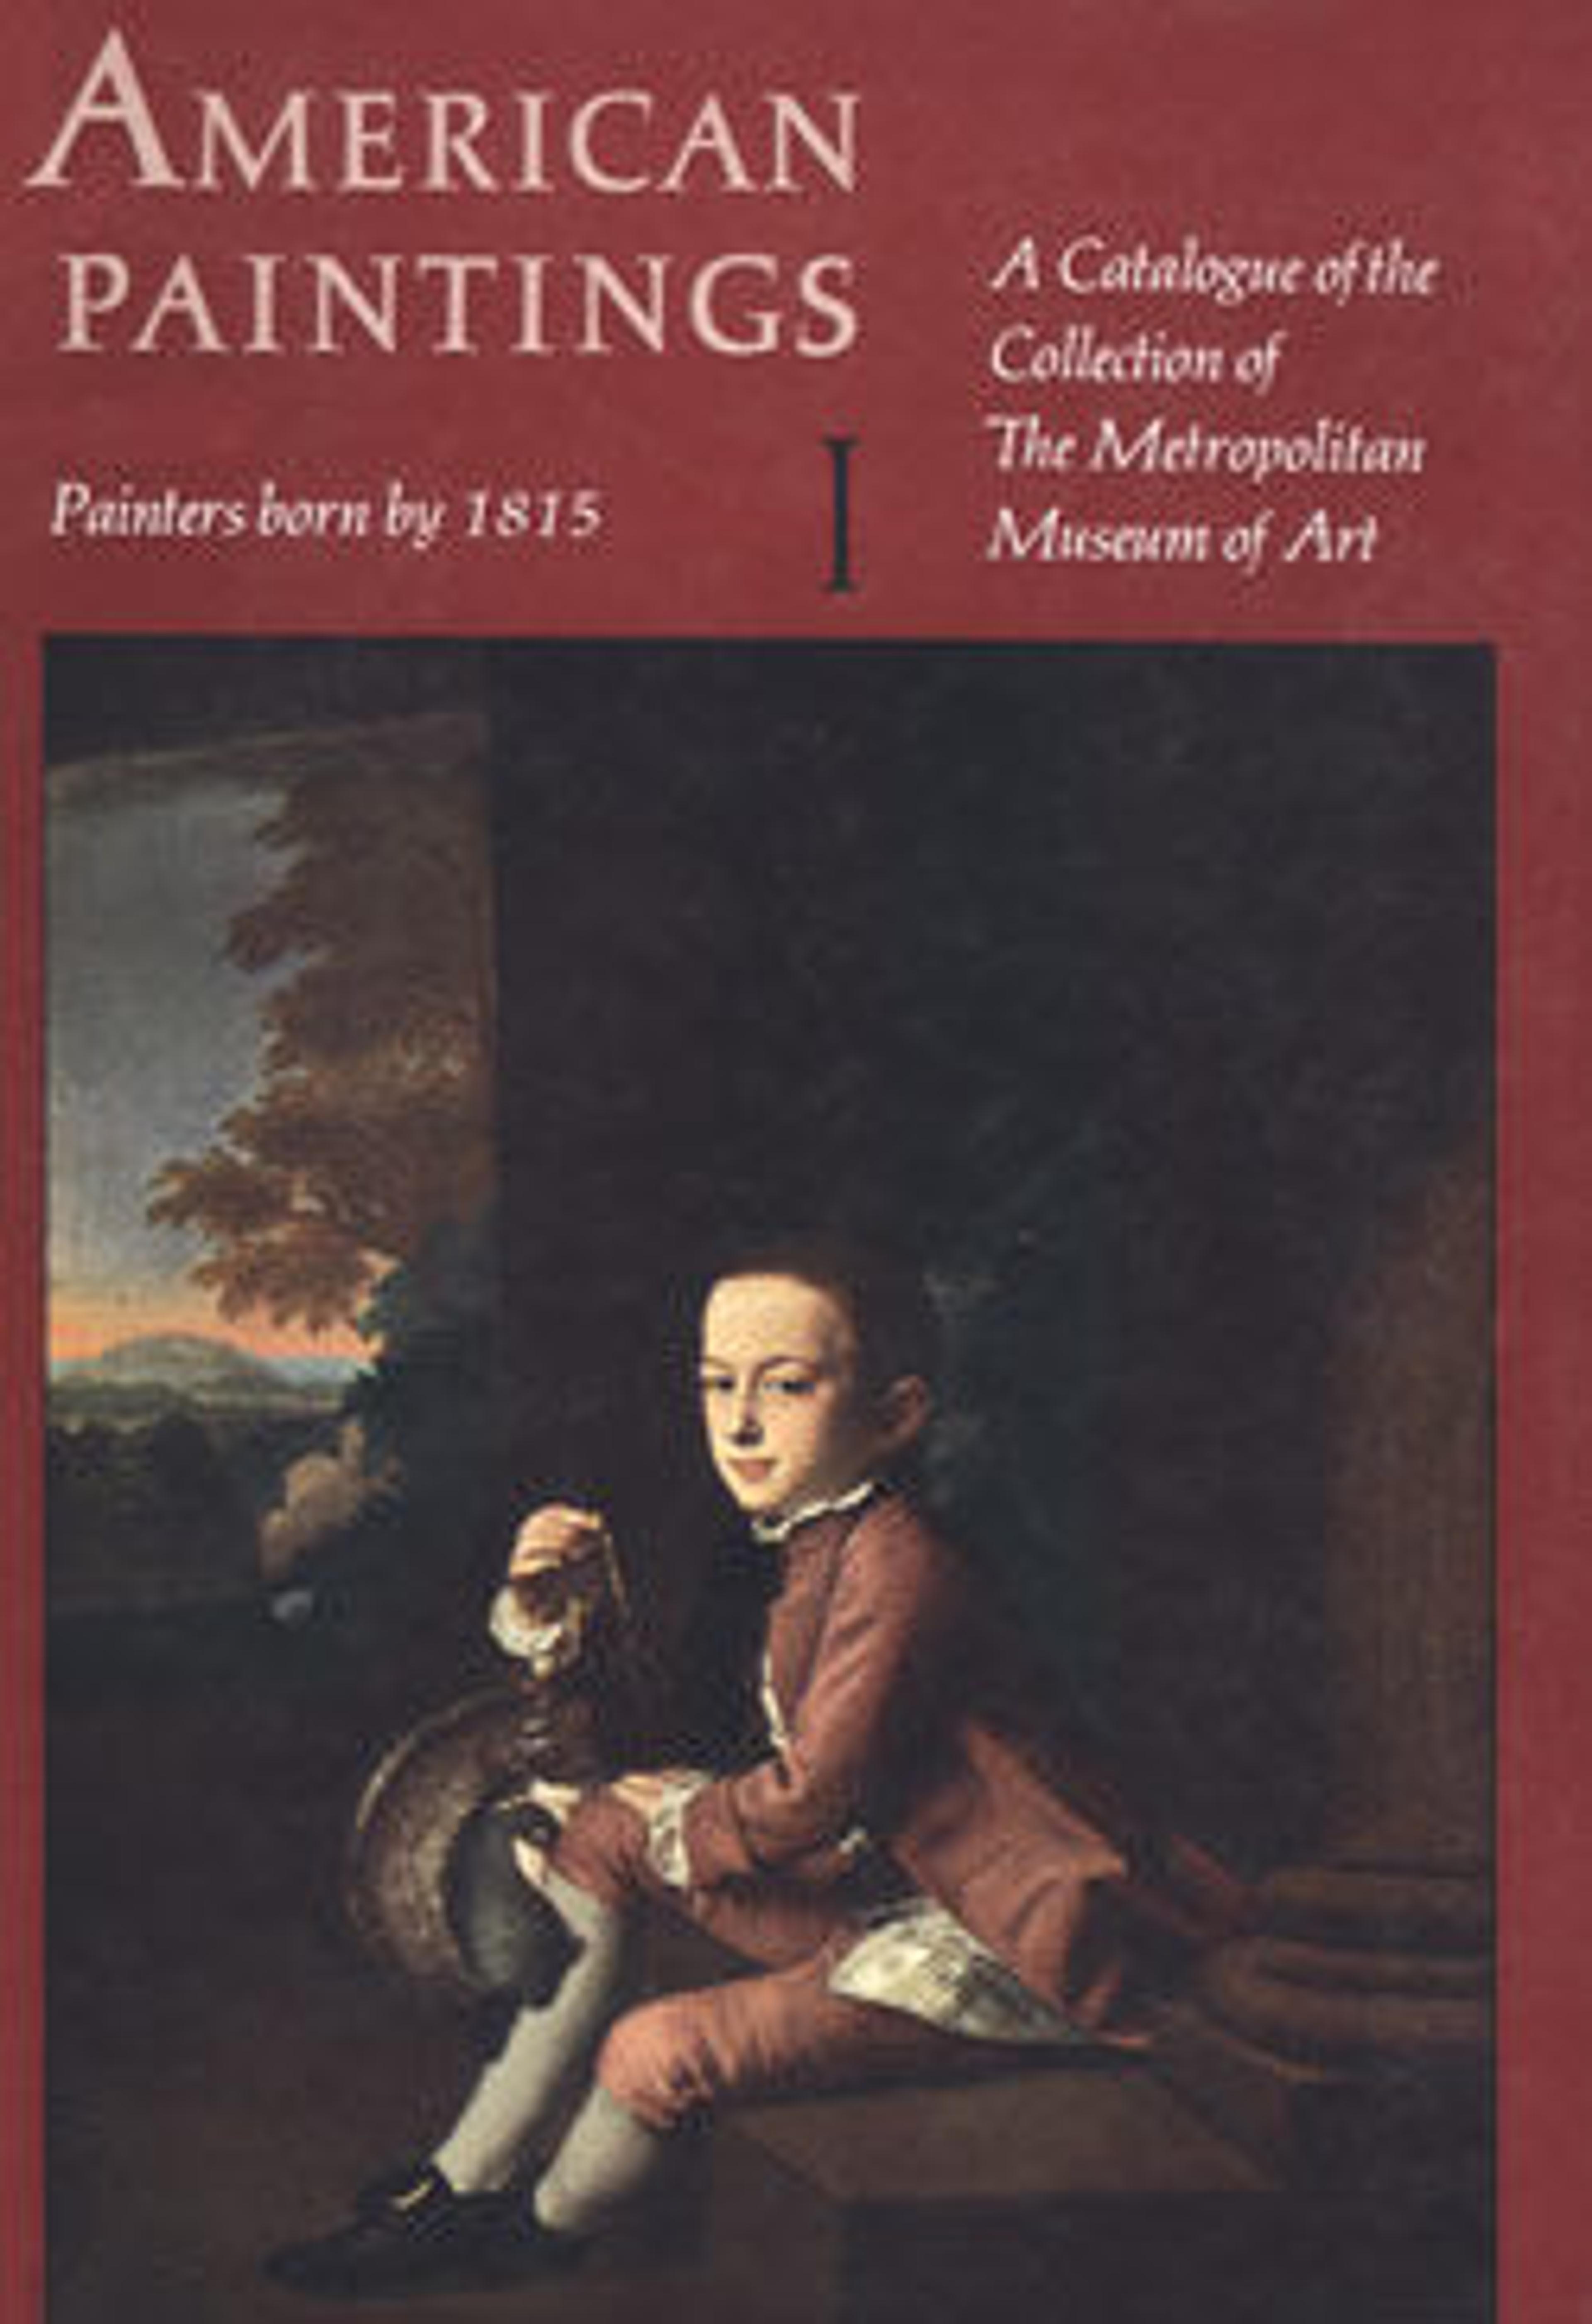 American Paintings: A Catalogue of the Collection of The Metropolitan Museum of Art, Vol. 1 Painters